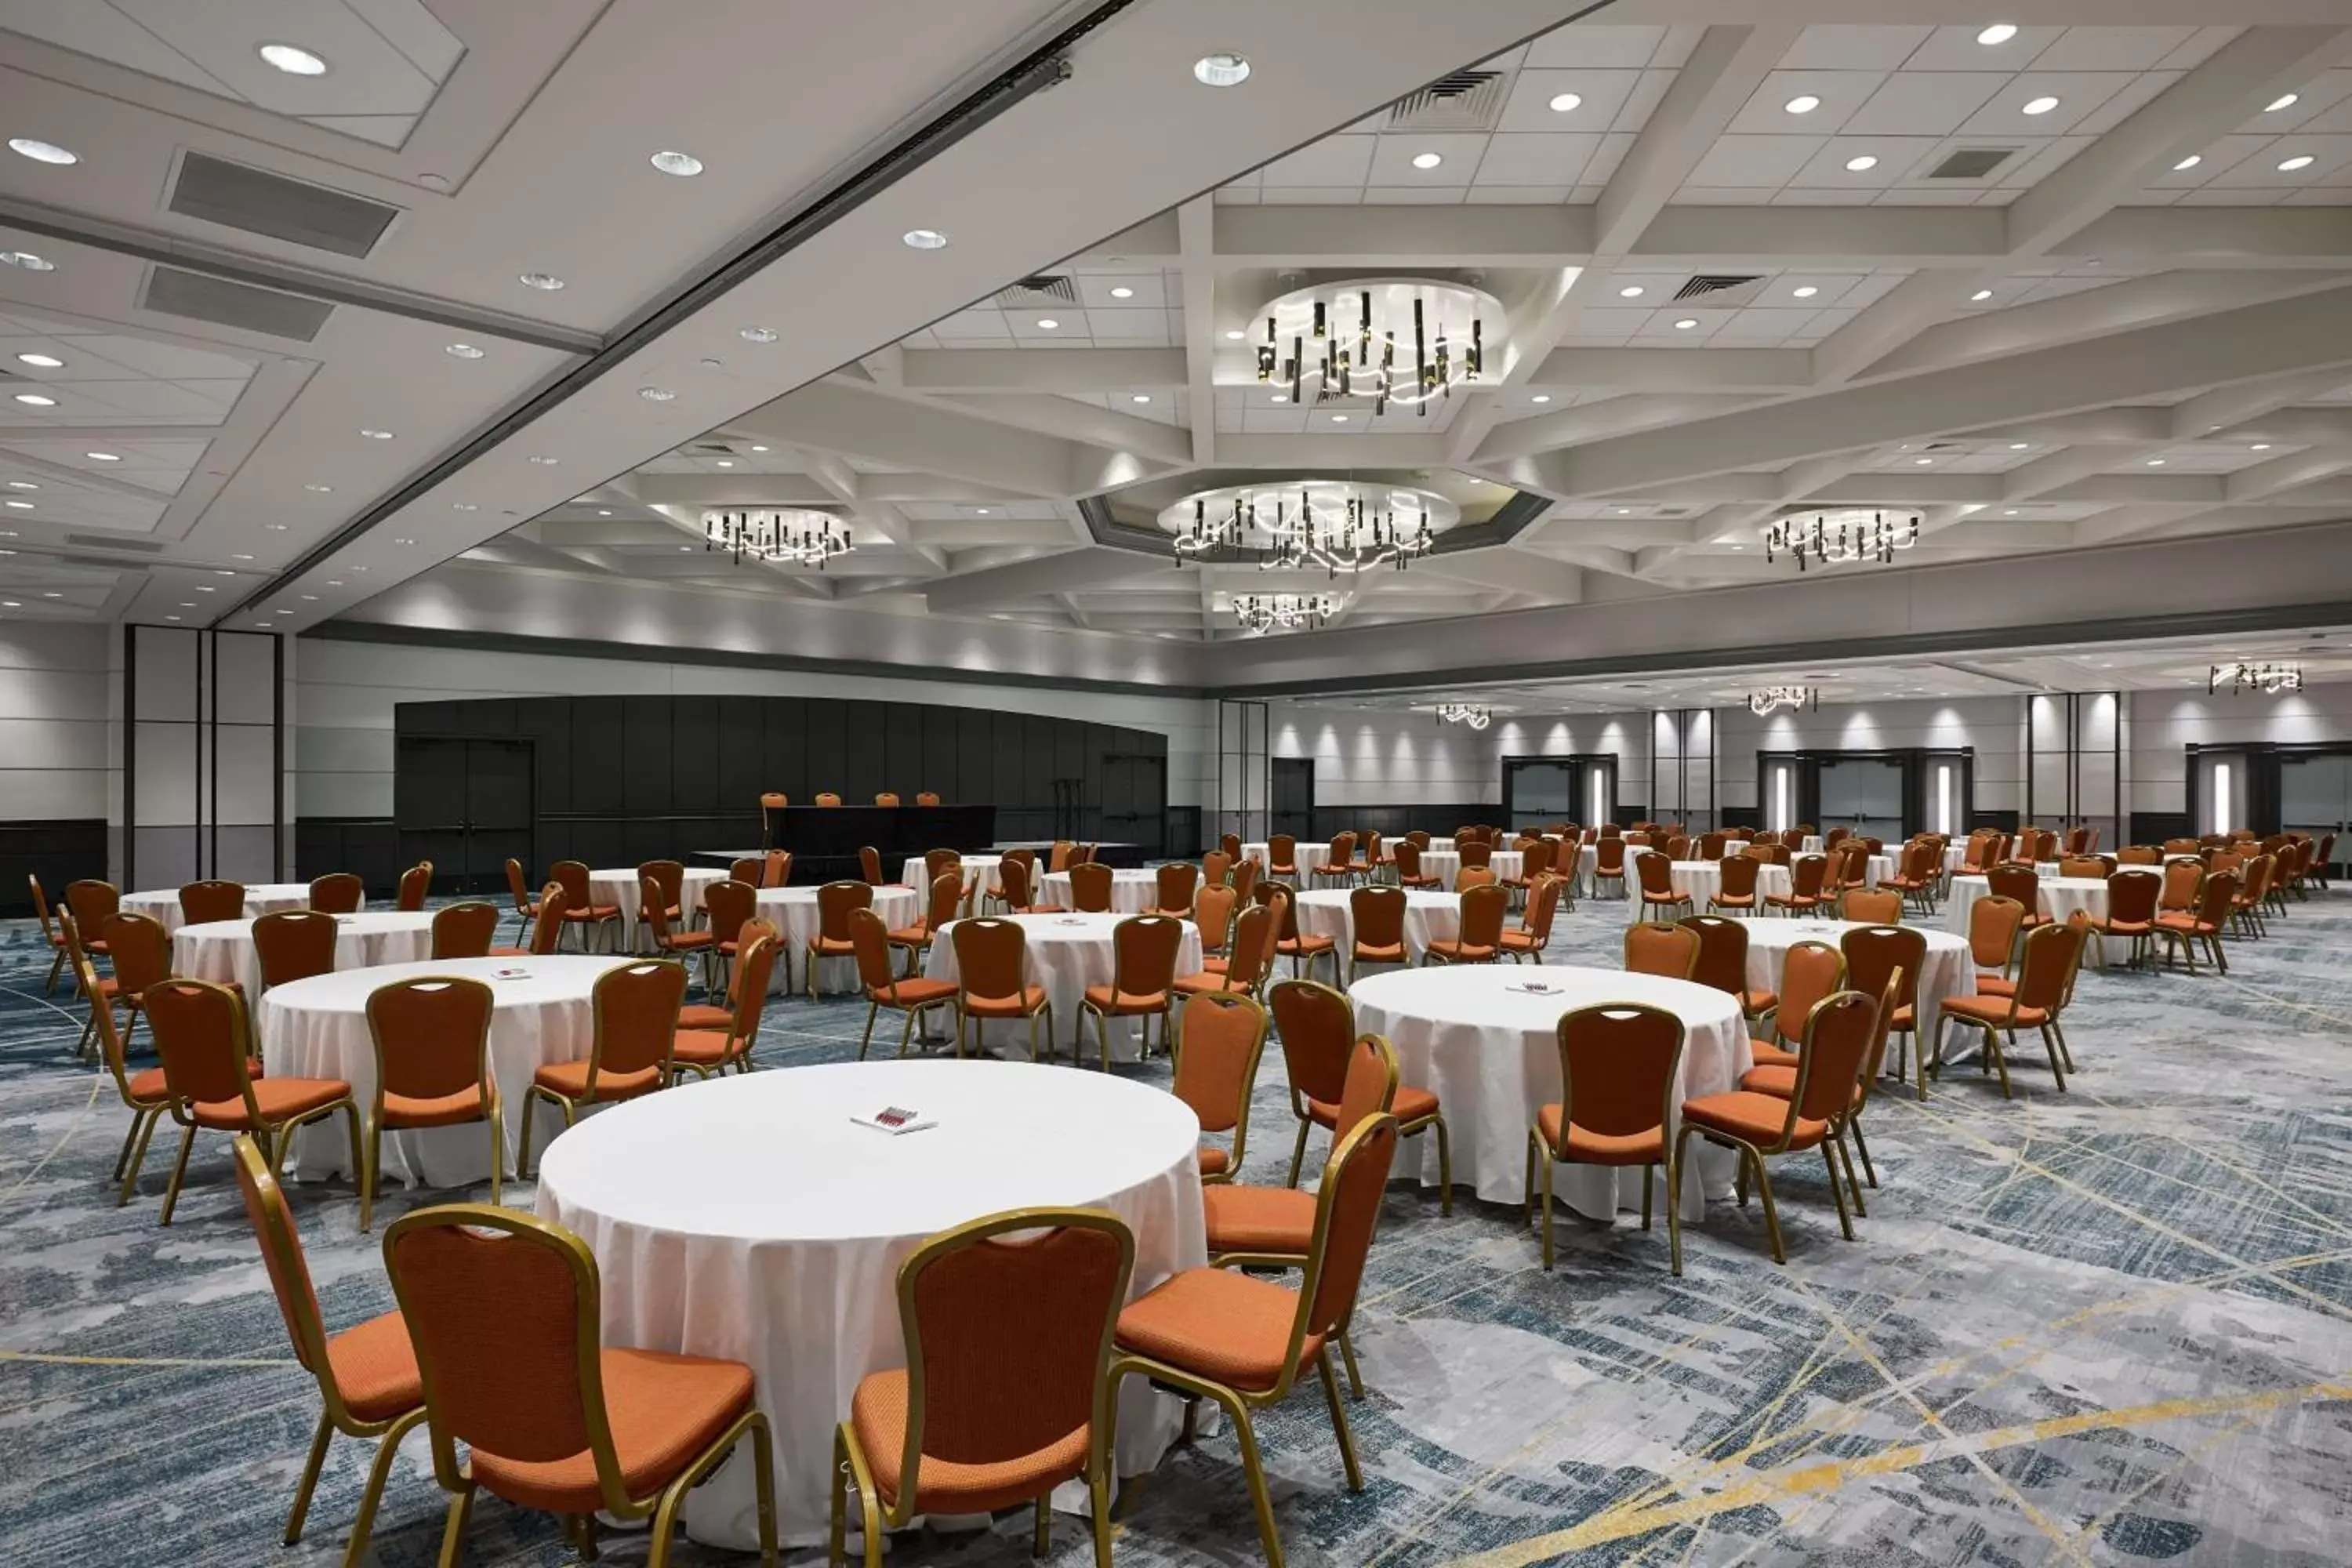 Meeting/conference room, Banquet Facilities in Marriott Chicago O’Hare